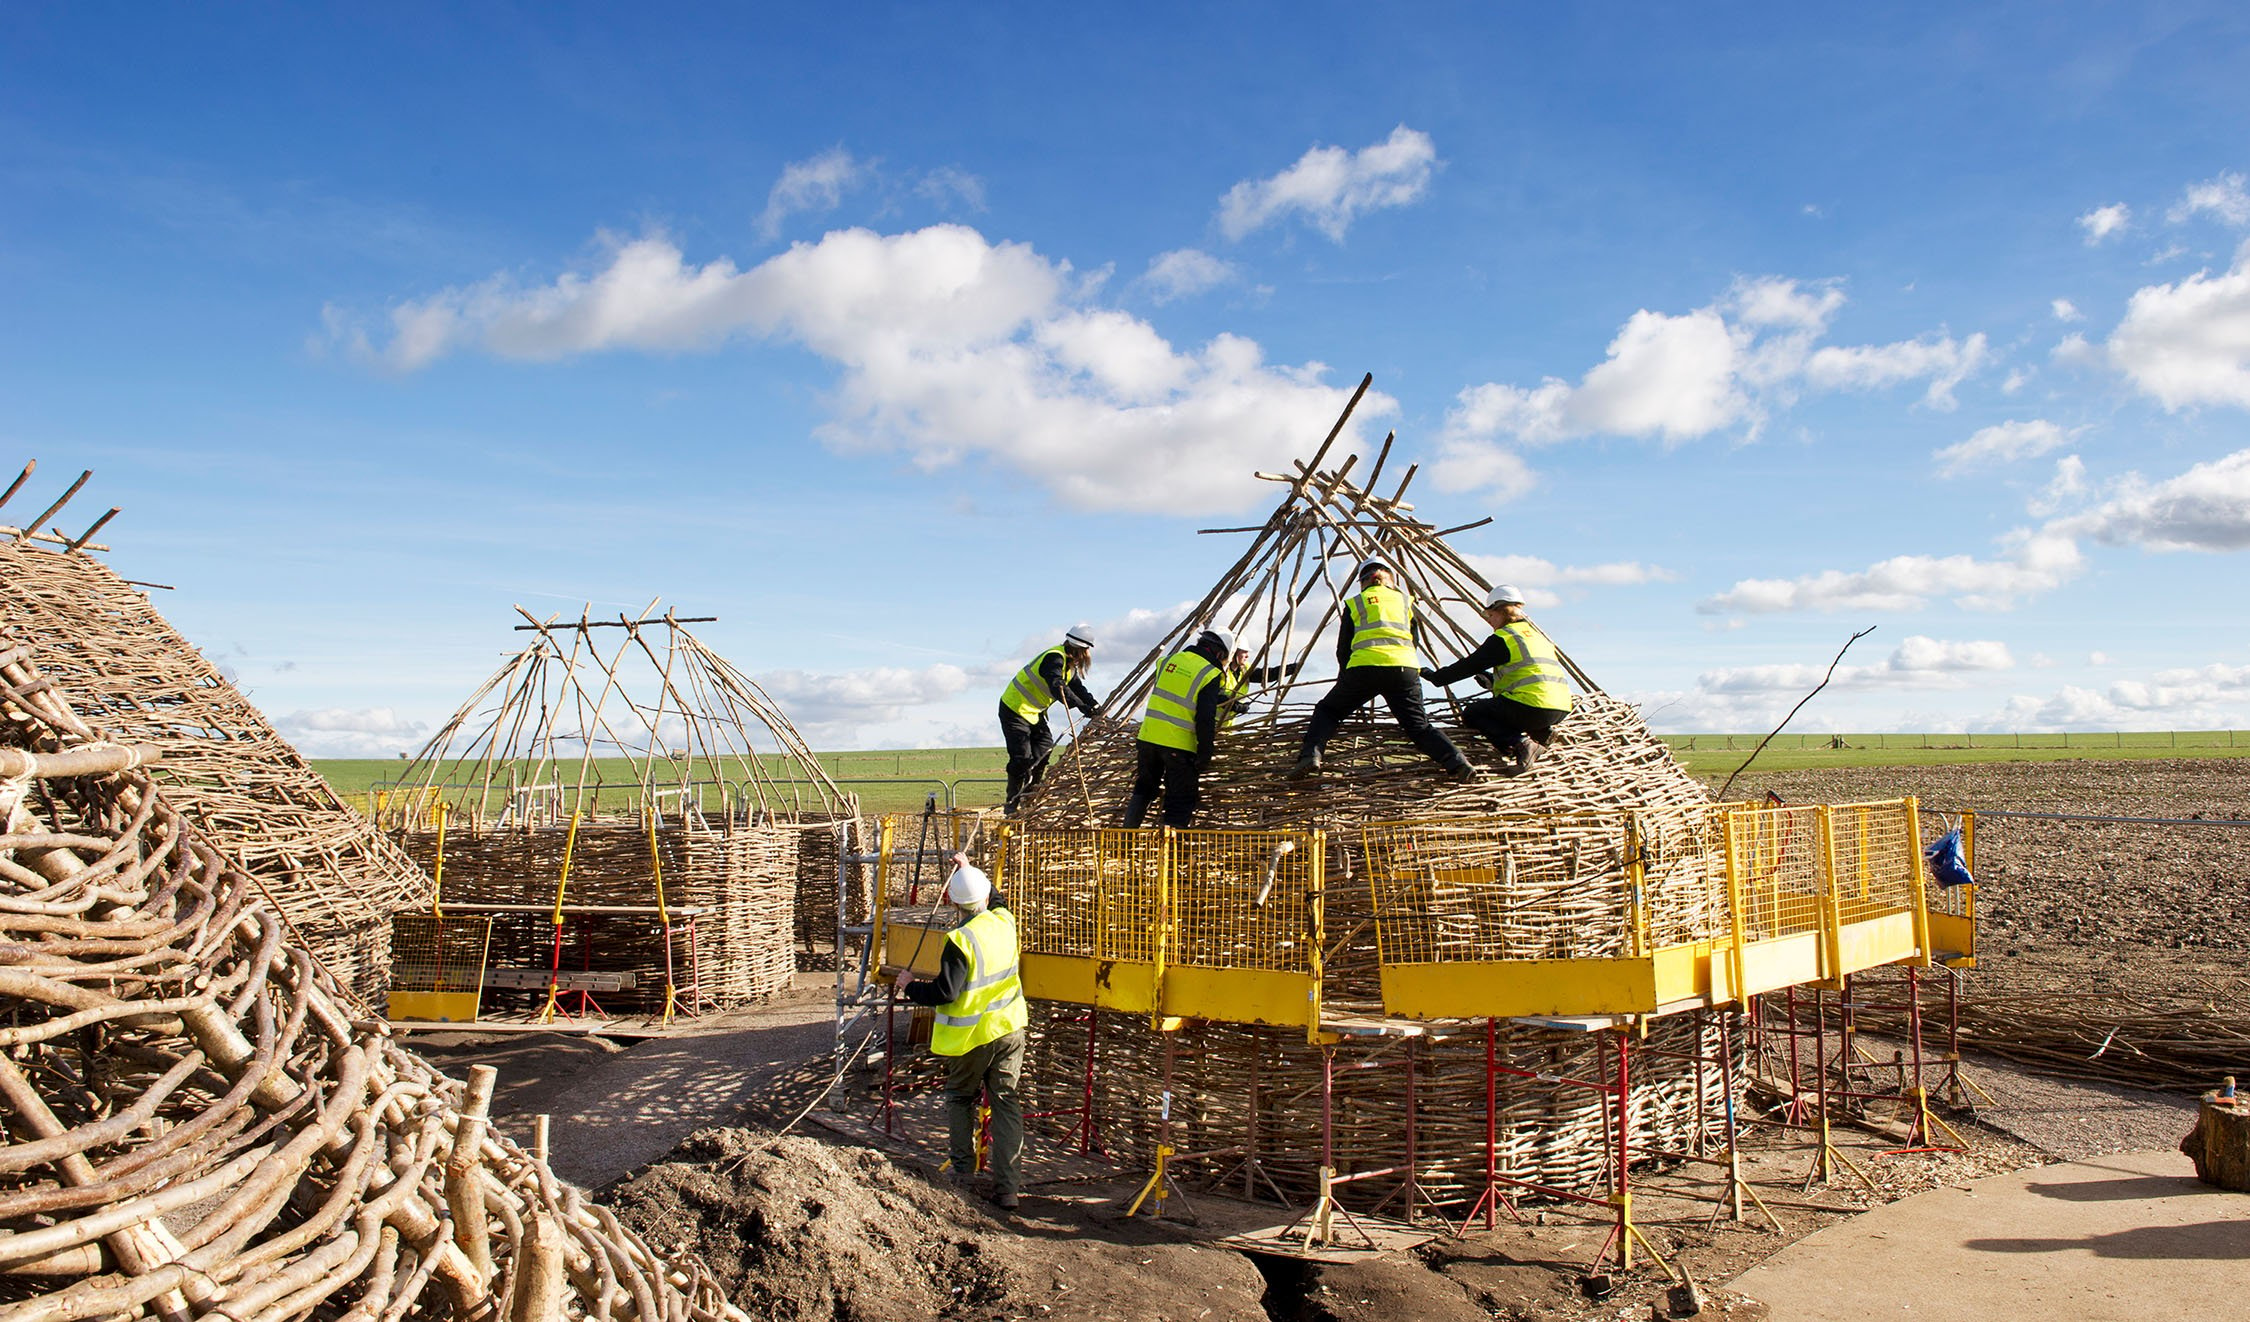 Five people in high-visibility clothing and helmets constructing a Neolithic-style hut.